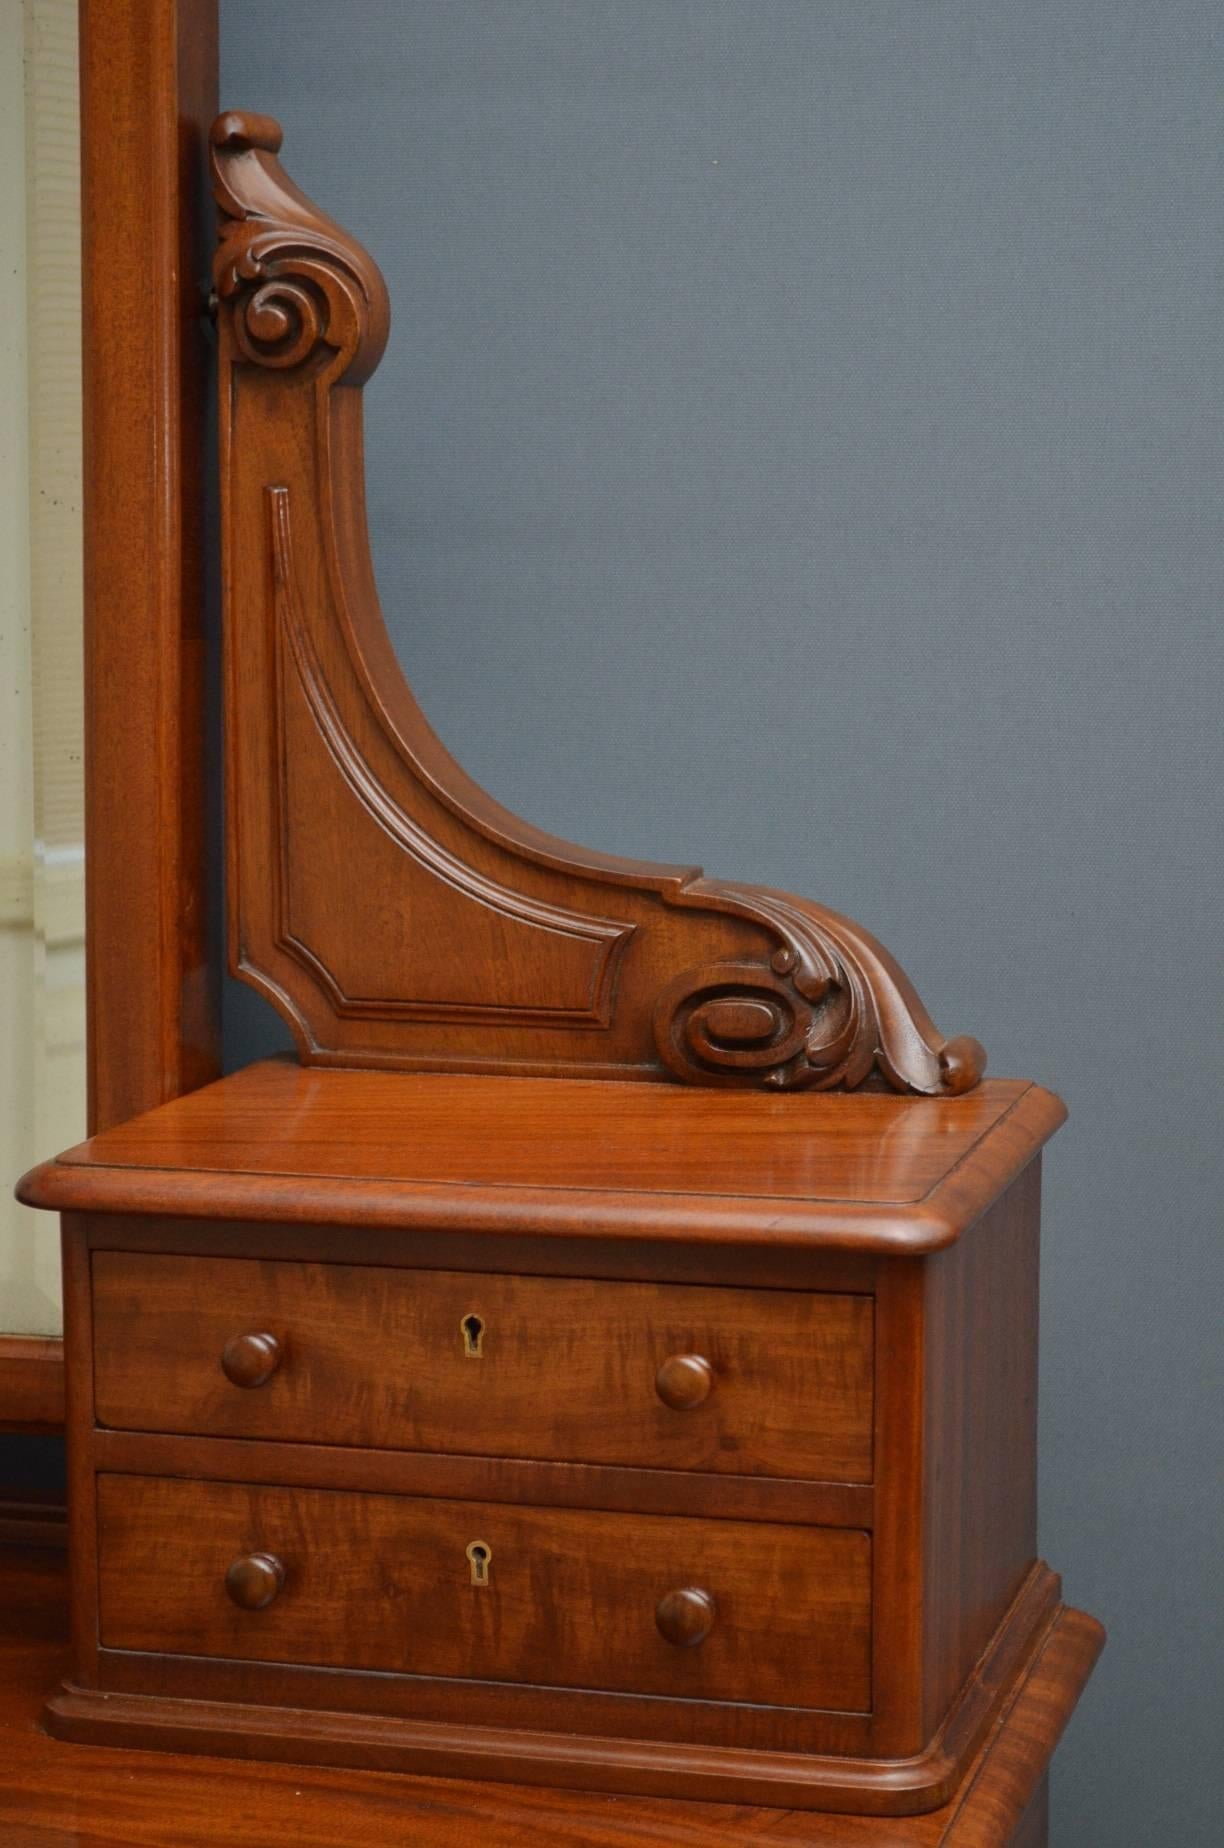 Sn3729 fine quality and very attractive, Victorian mahogany, pedestal dressing table by Maple & Co, having original bevelled edge mirror in arched moulded frame on carved supports with small jewellery drawers, figured mahogany, moulded top with 3